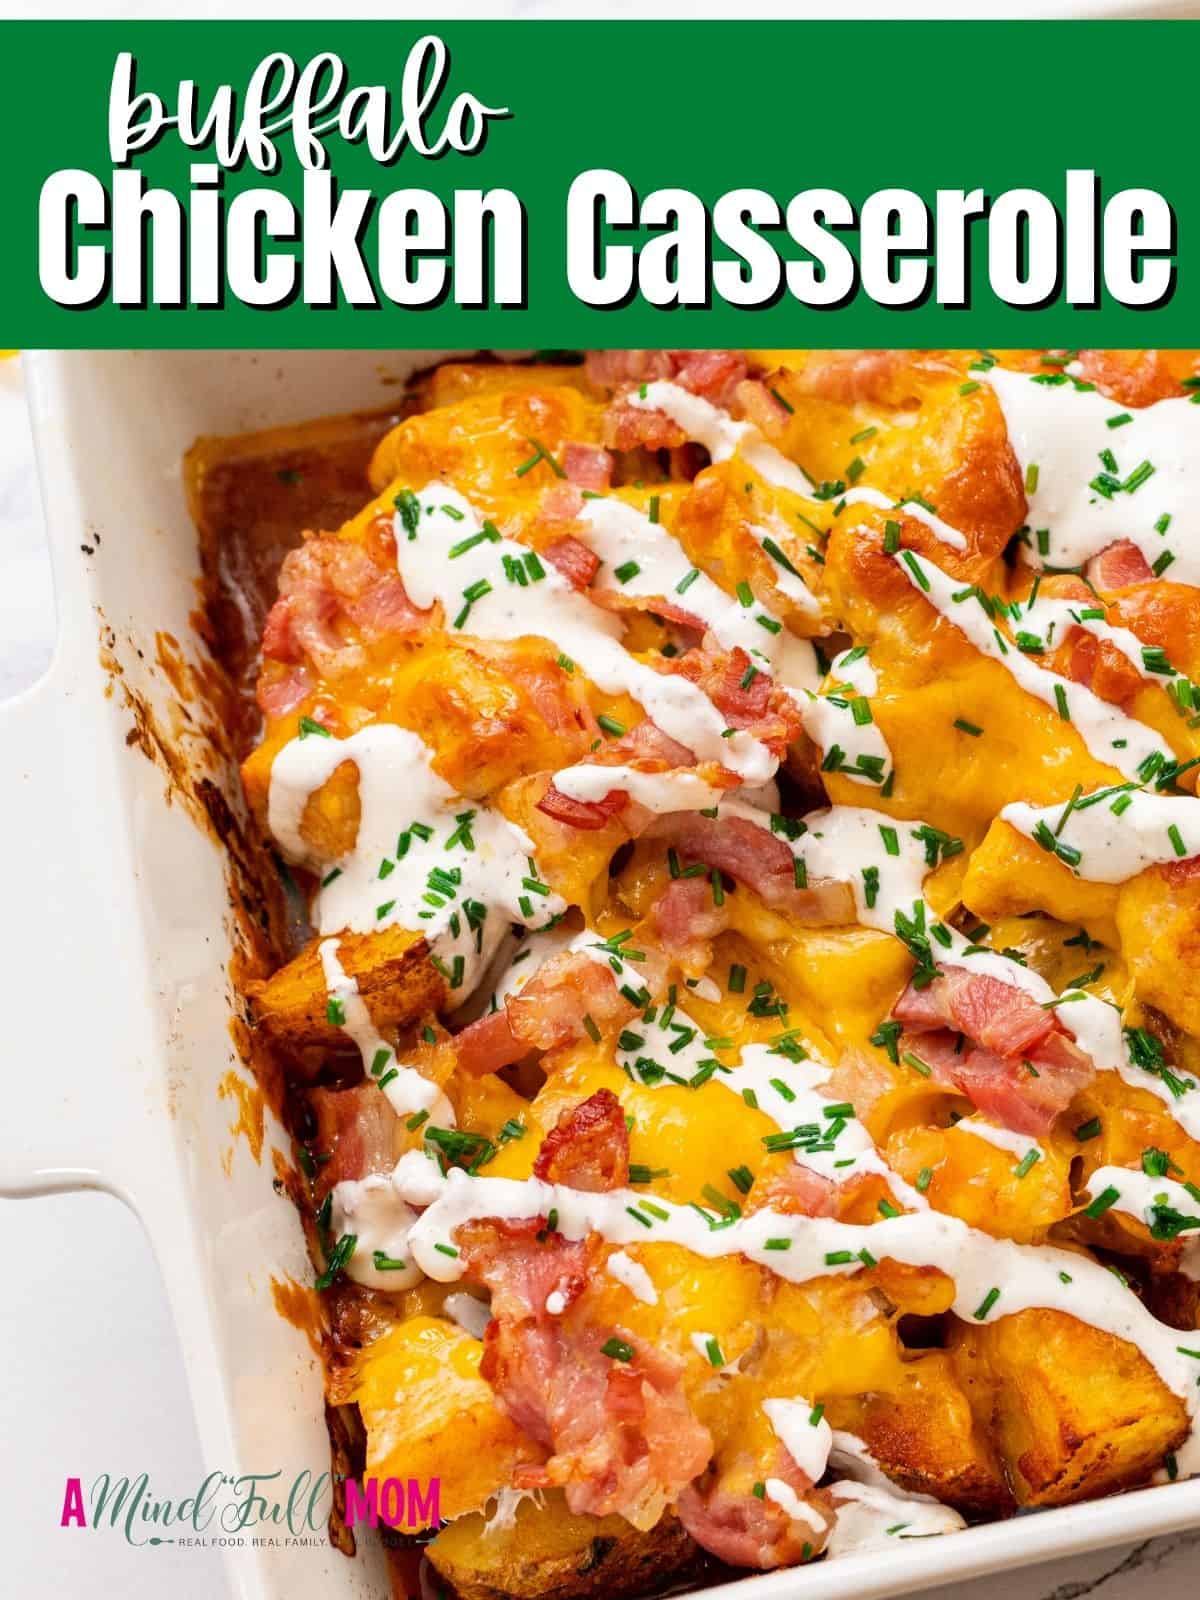 No one can resist this easy Buffalo Chicken Casserole made with layers of seasoned potatoes, chicken, cheese, and bacon. This Buffalo Chicken Casserole is an easy, gluten-free family dinner that always wins the family over!